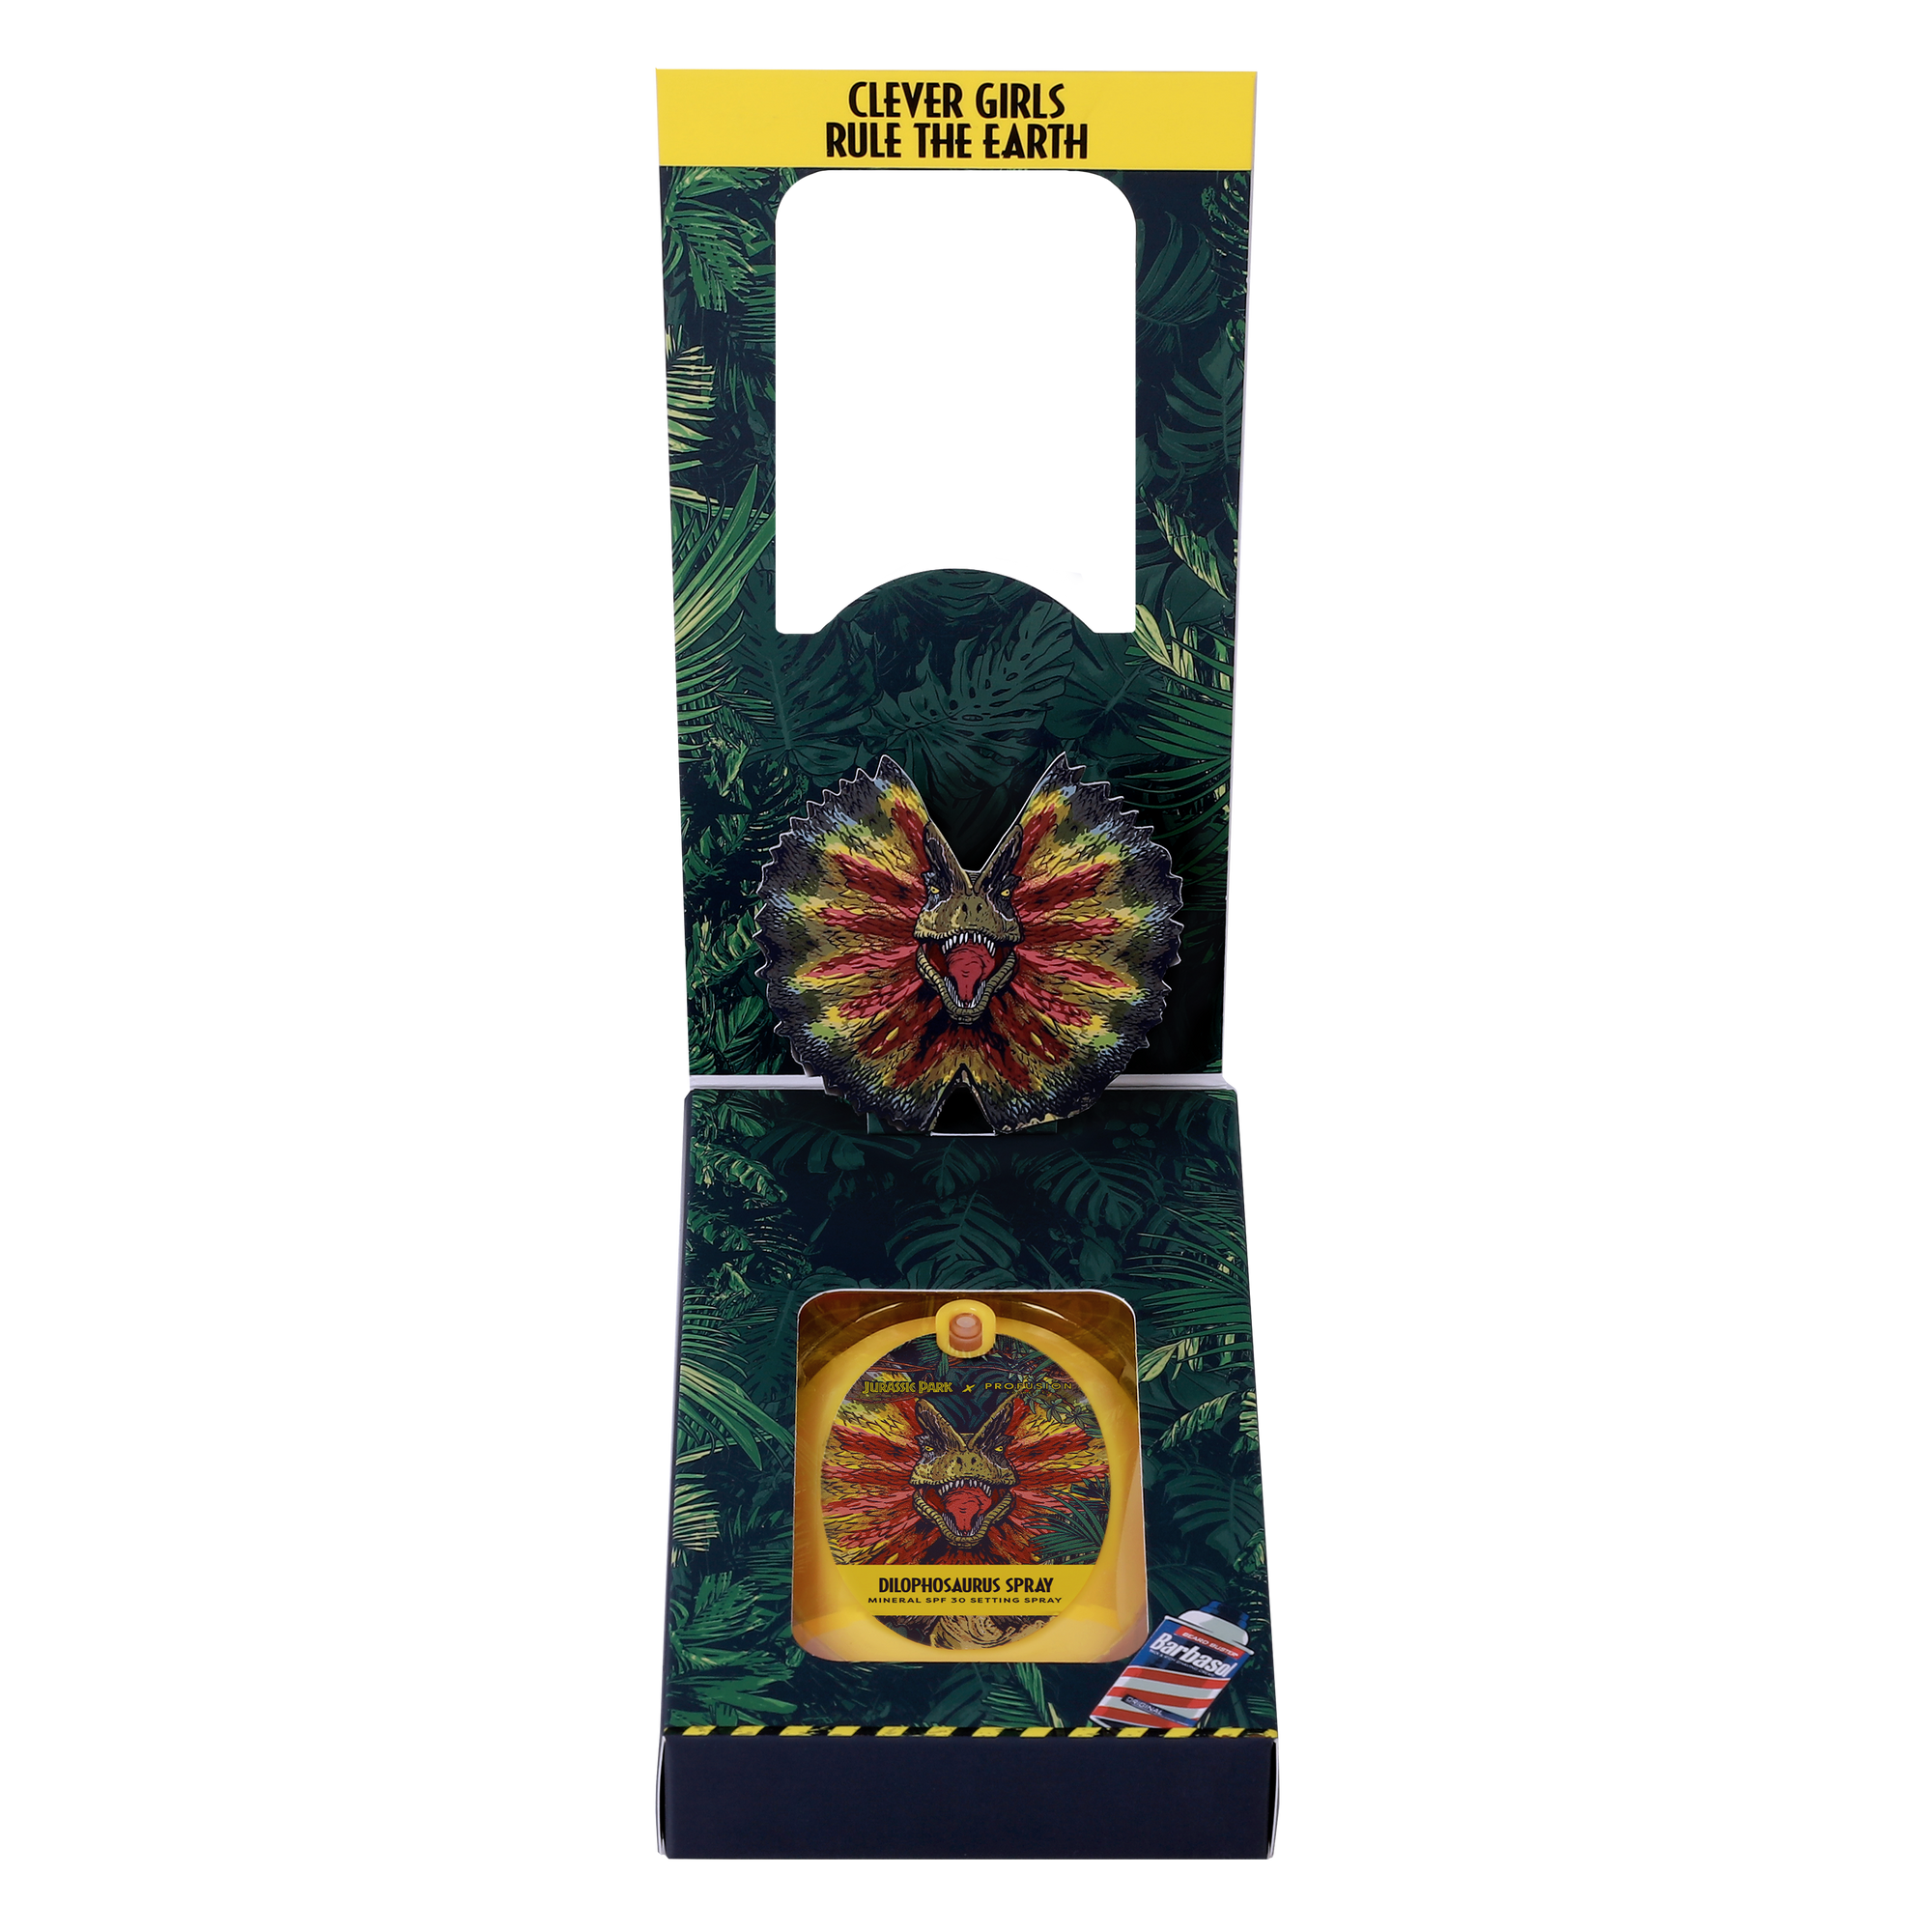 spray in packaging and front cover flips open with design of leaves and a pop up of a Dilophosaurus